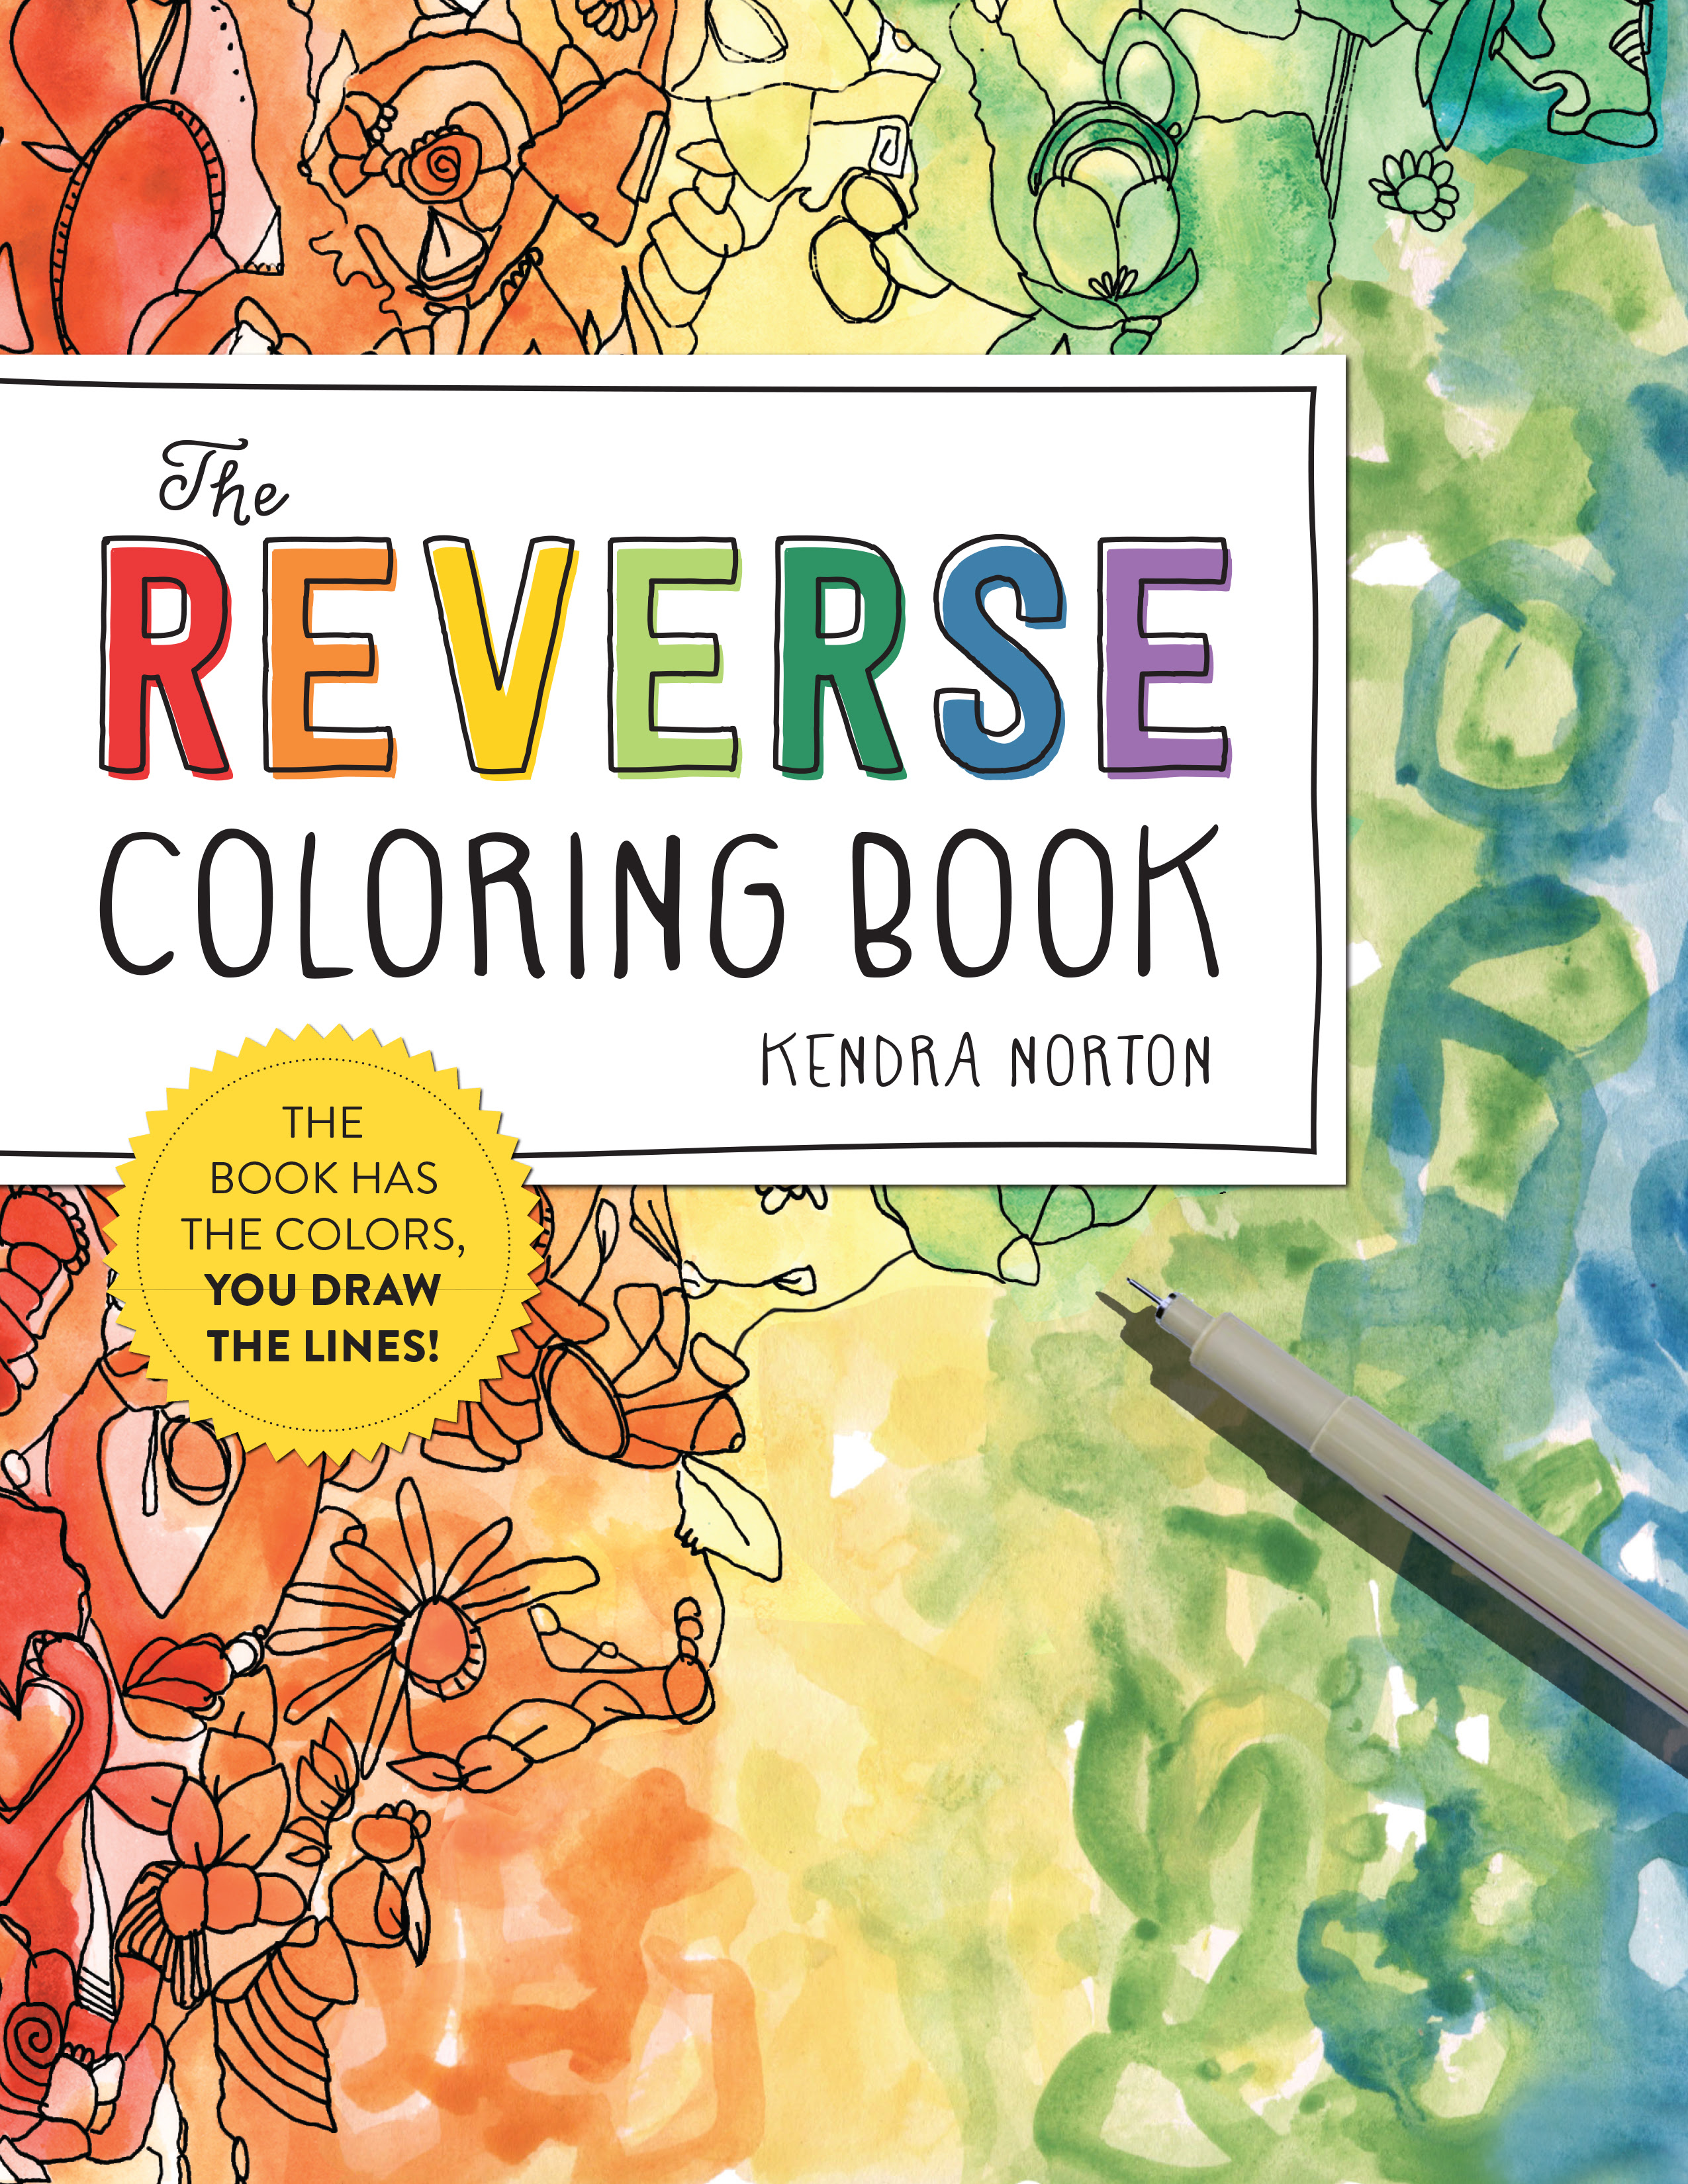 The Reverse Coloring Book?: The Book Has the Colors, You Draw the Lines! PDF